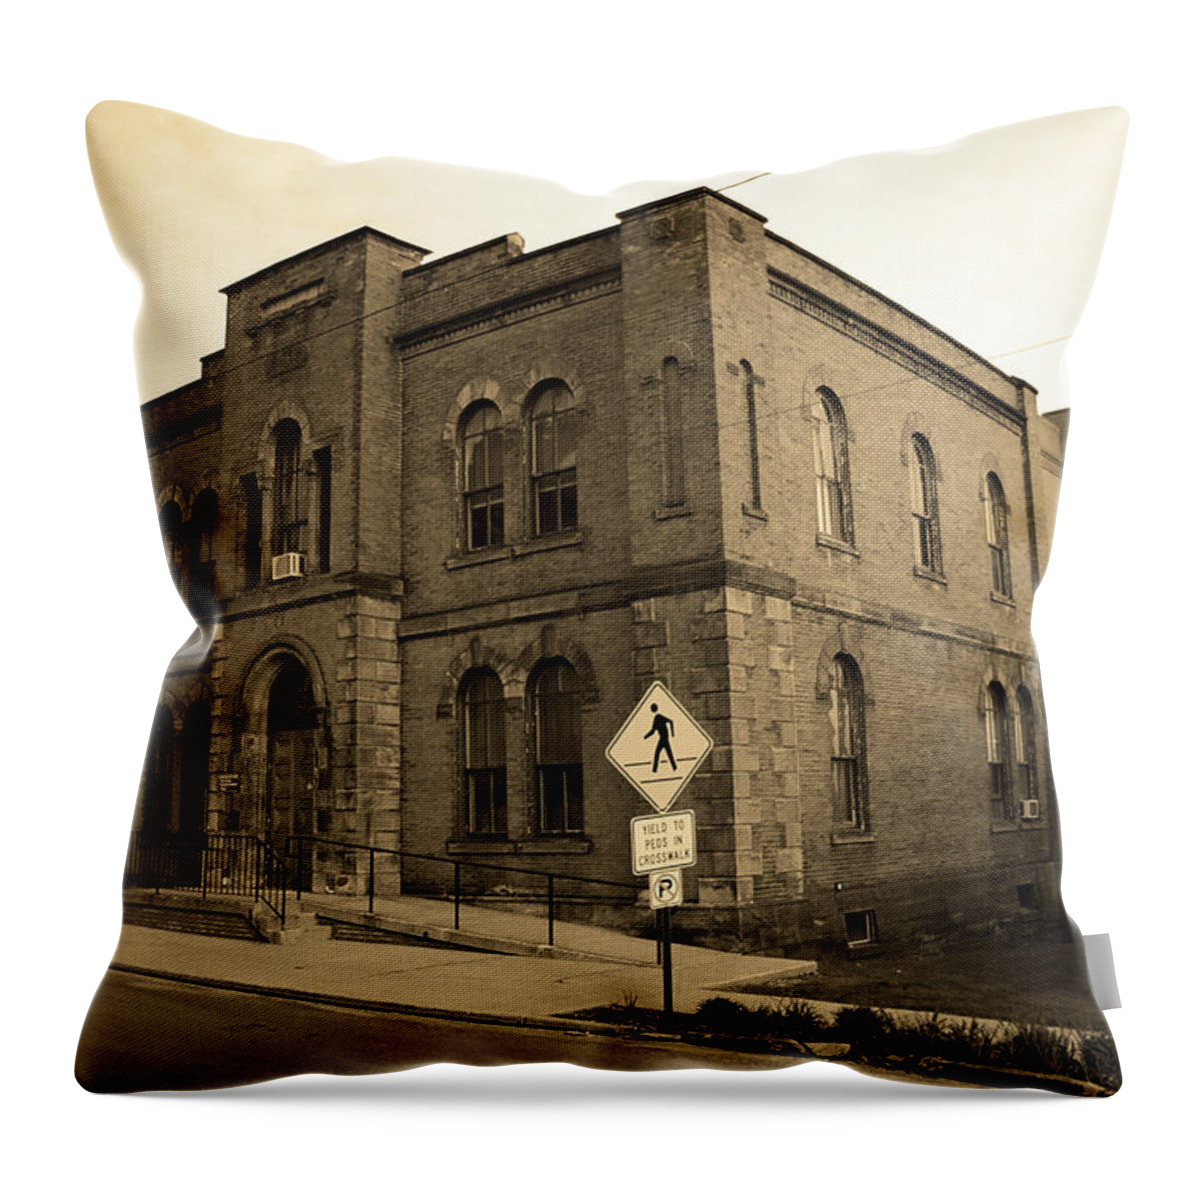 America Throw Pillow featuring the photograph Mercer, Pa - Vintage Building 2008 Sepia by Frank Romeo